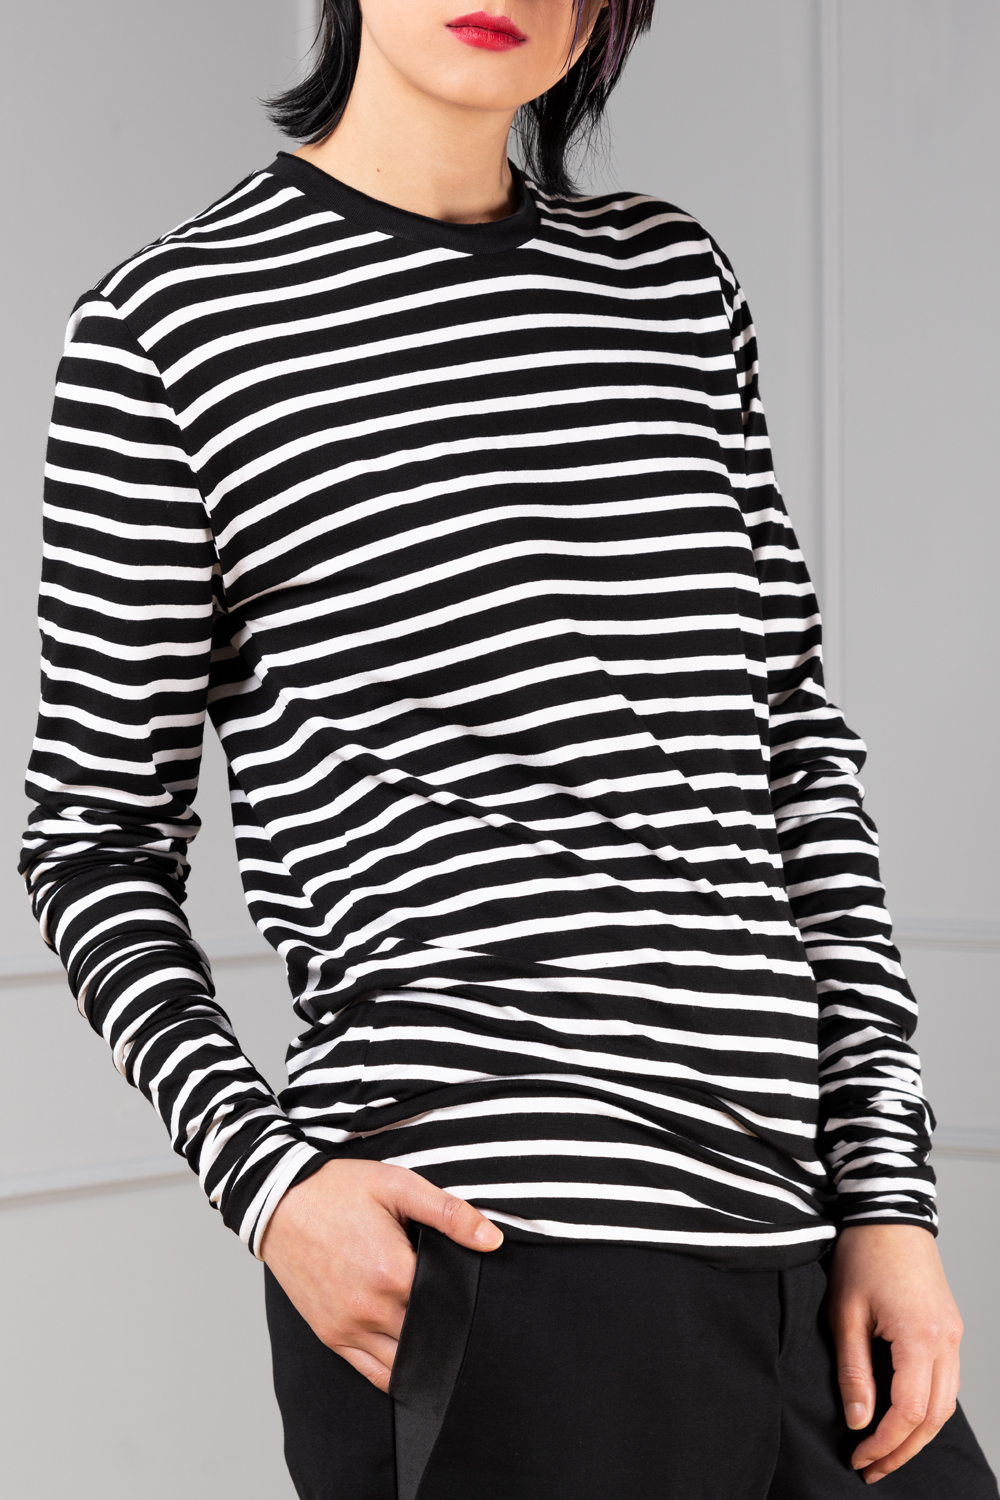 Striped Long Sleeve Shirt Black And White | vlr.eng.br